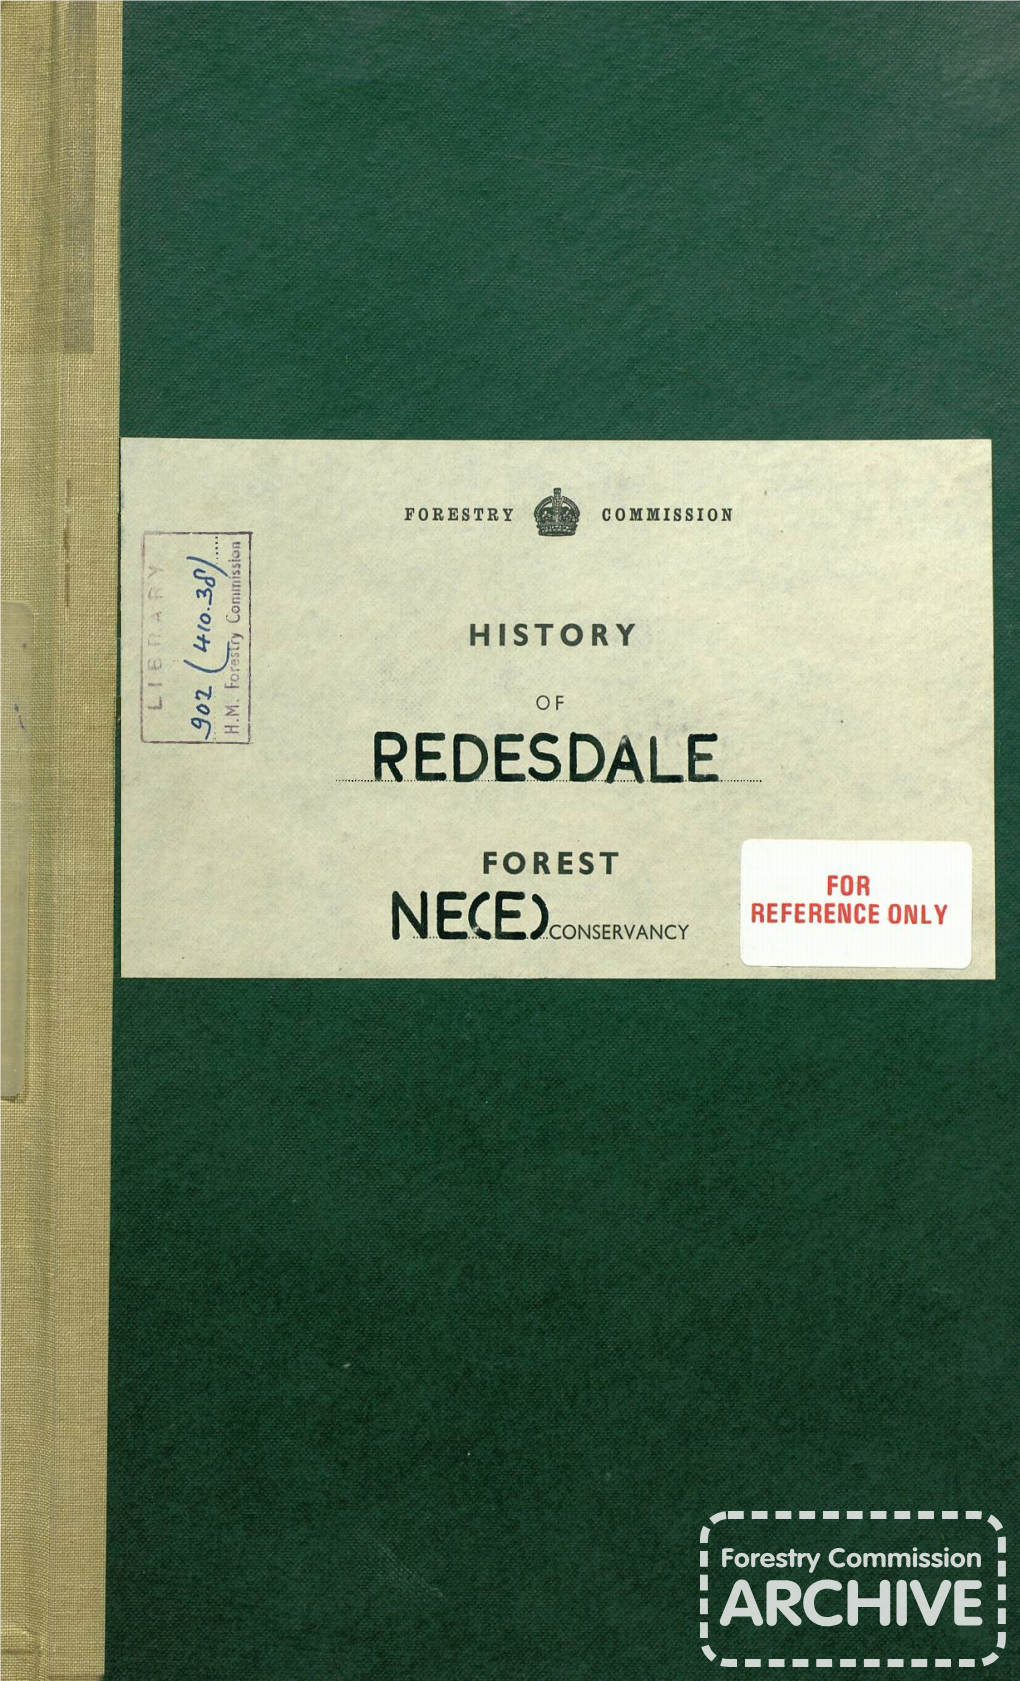 History of Redesdale Forest 1932-1951